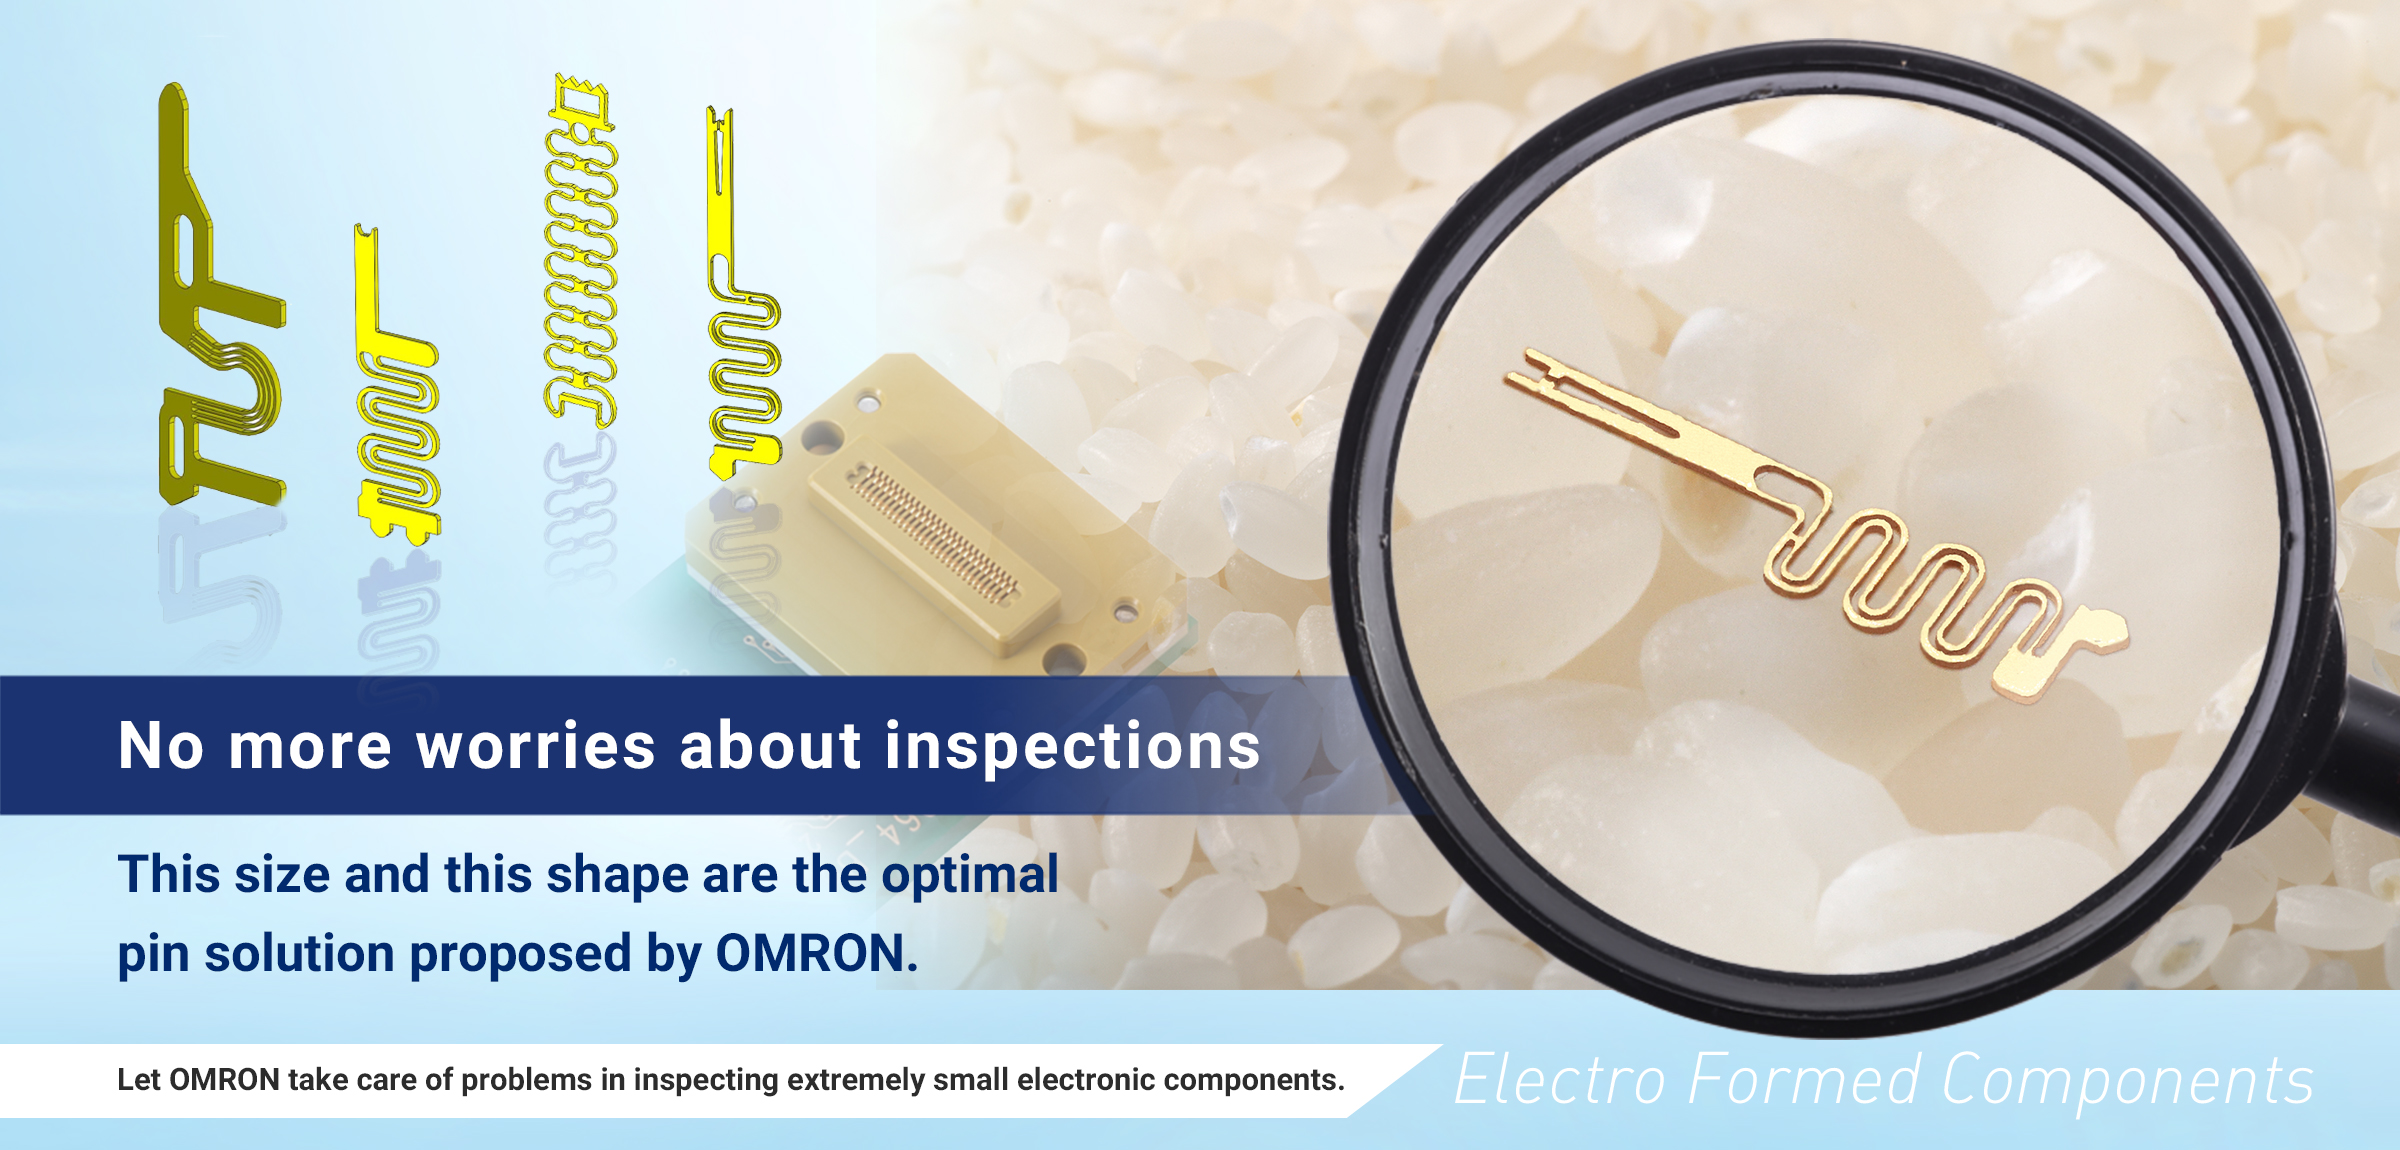 No more worries about inspections. This size and this shape are the optimal pin solution proposed by OMRON. Let OMRON take care of problems in inspecting extremely small electronic components.